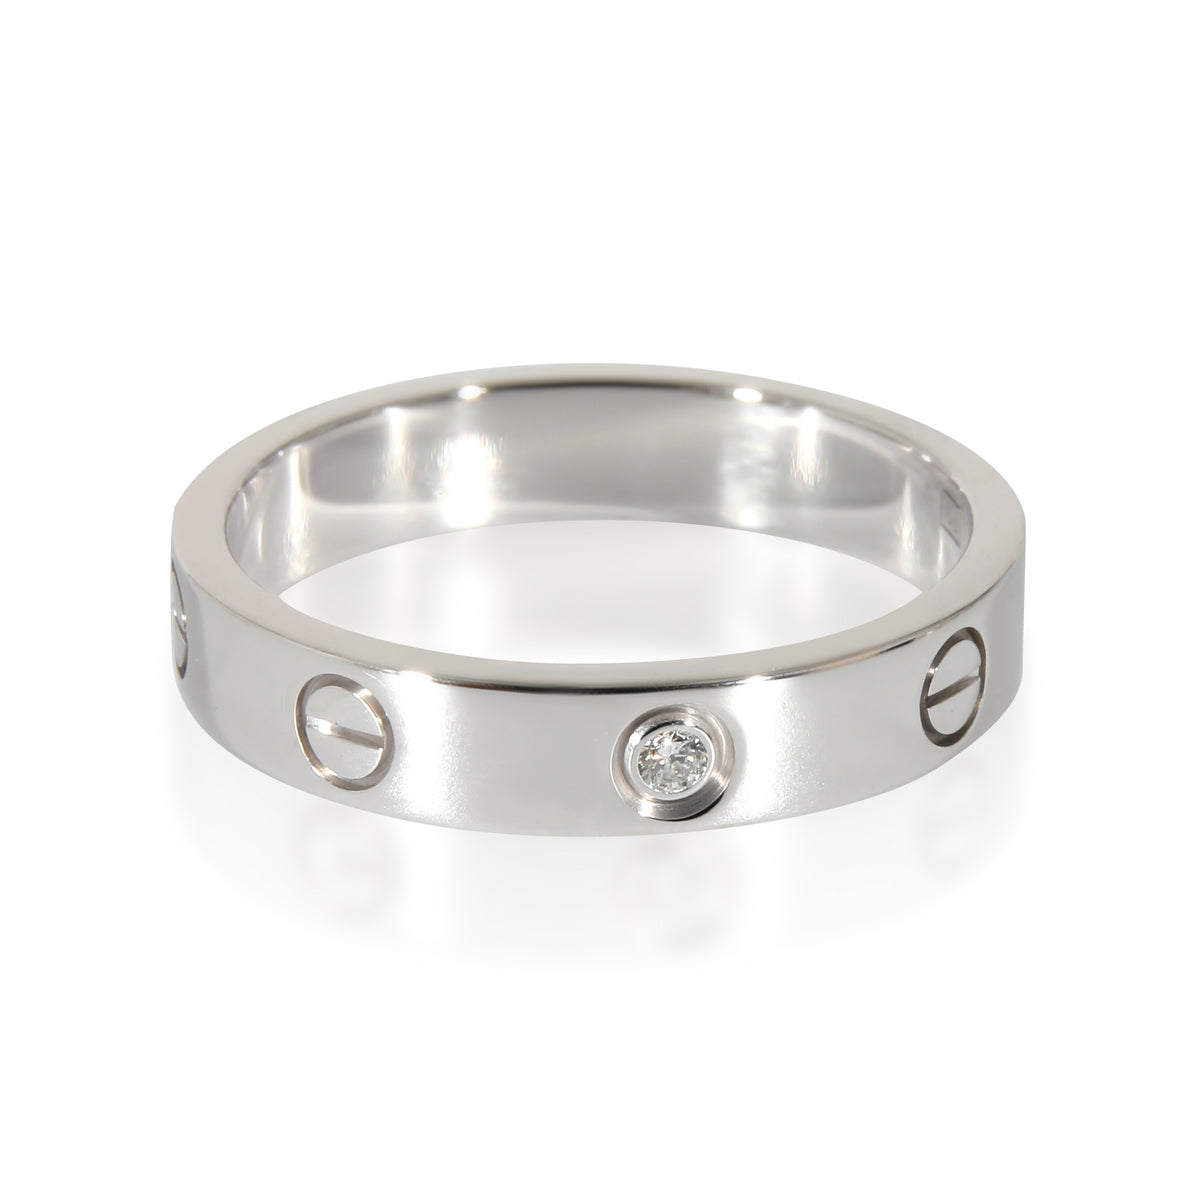 Cartier Love Wedding Band in 18k White Gold 0.02 CTW